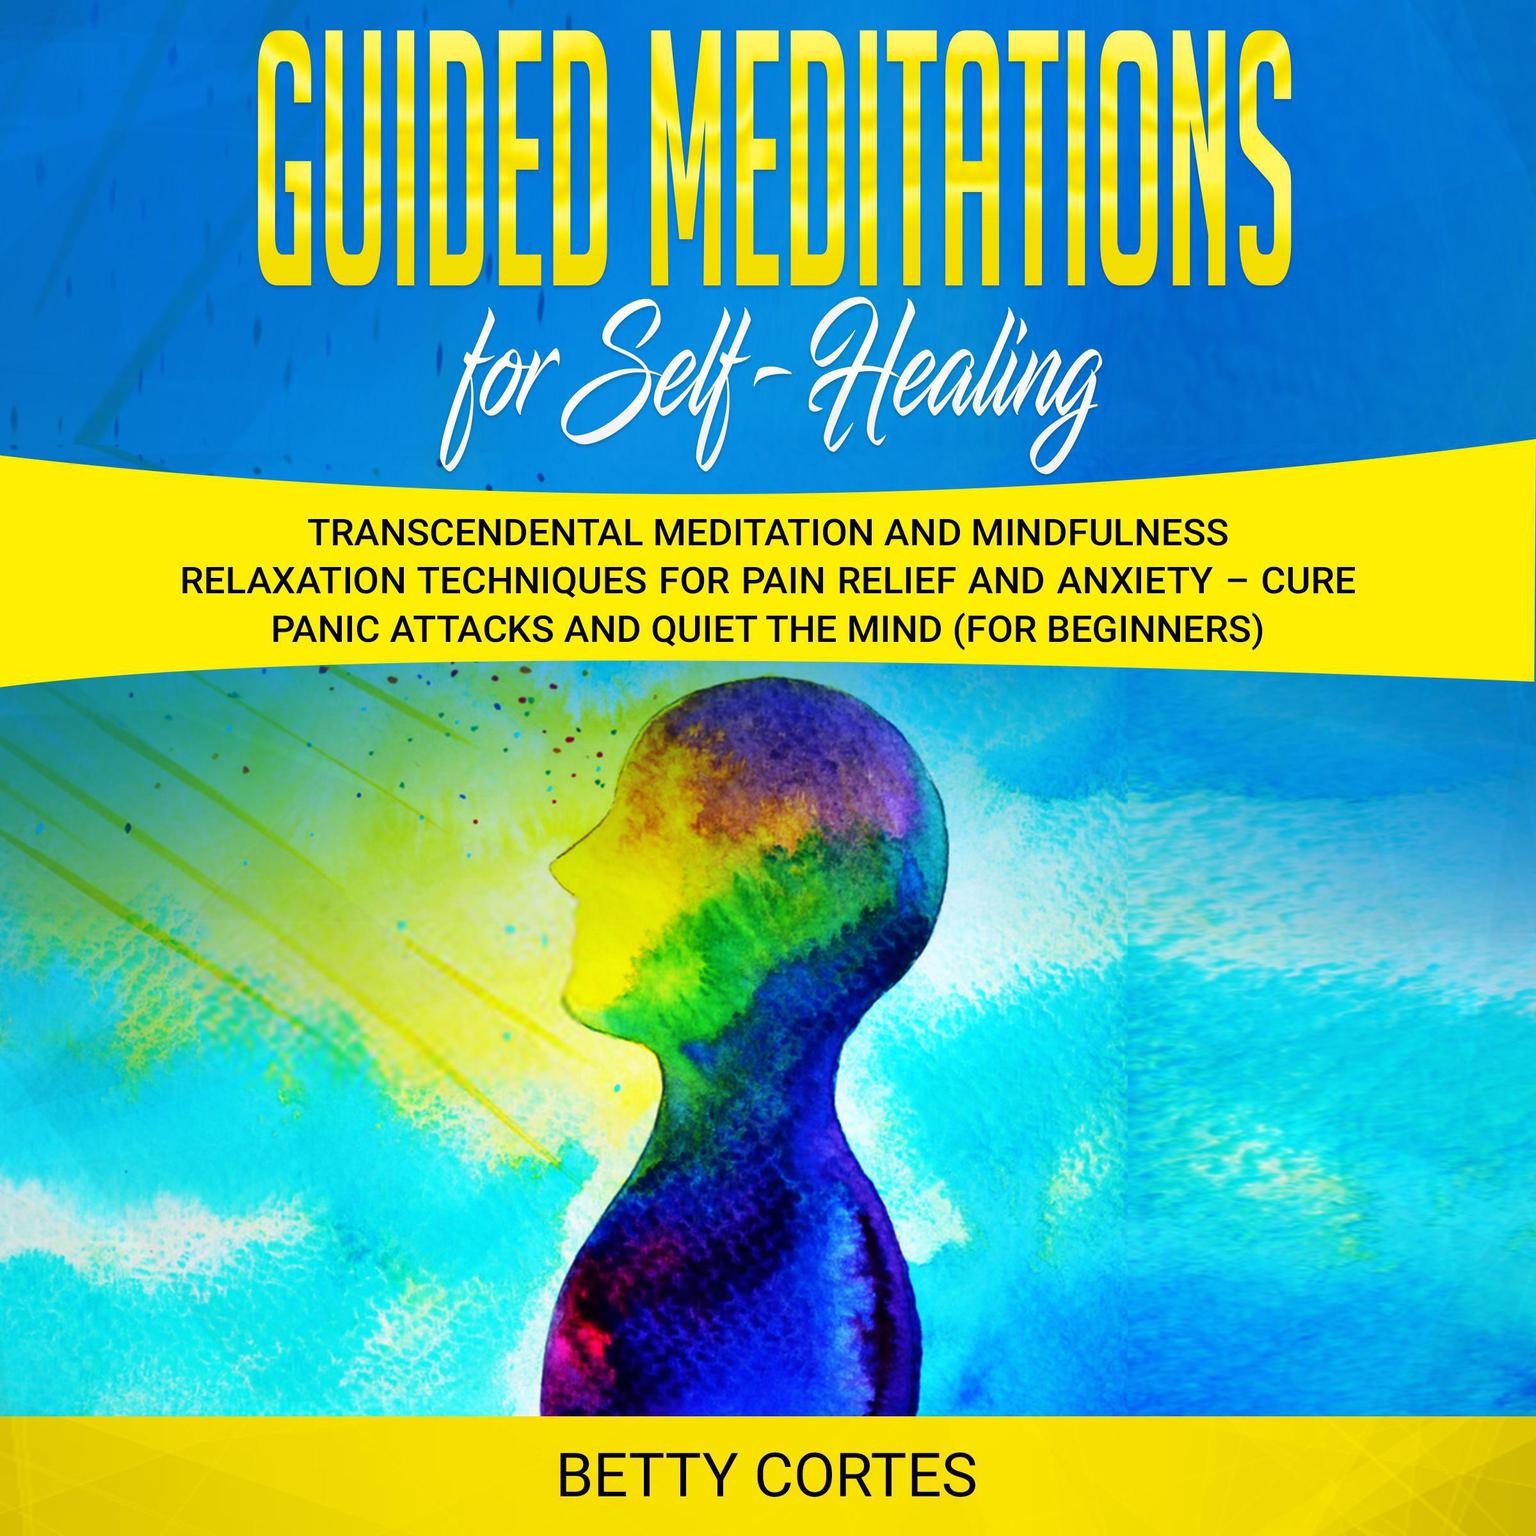 Guided Meditations for Self Healing: Transcendental Meditation and Mindfulness Relaxation Techniques for Pain Relief and Anxiety – Cure Panic Attacks and Quiet the Mind (for Beginners) Audiobook, by Betty Cortes